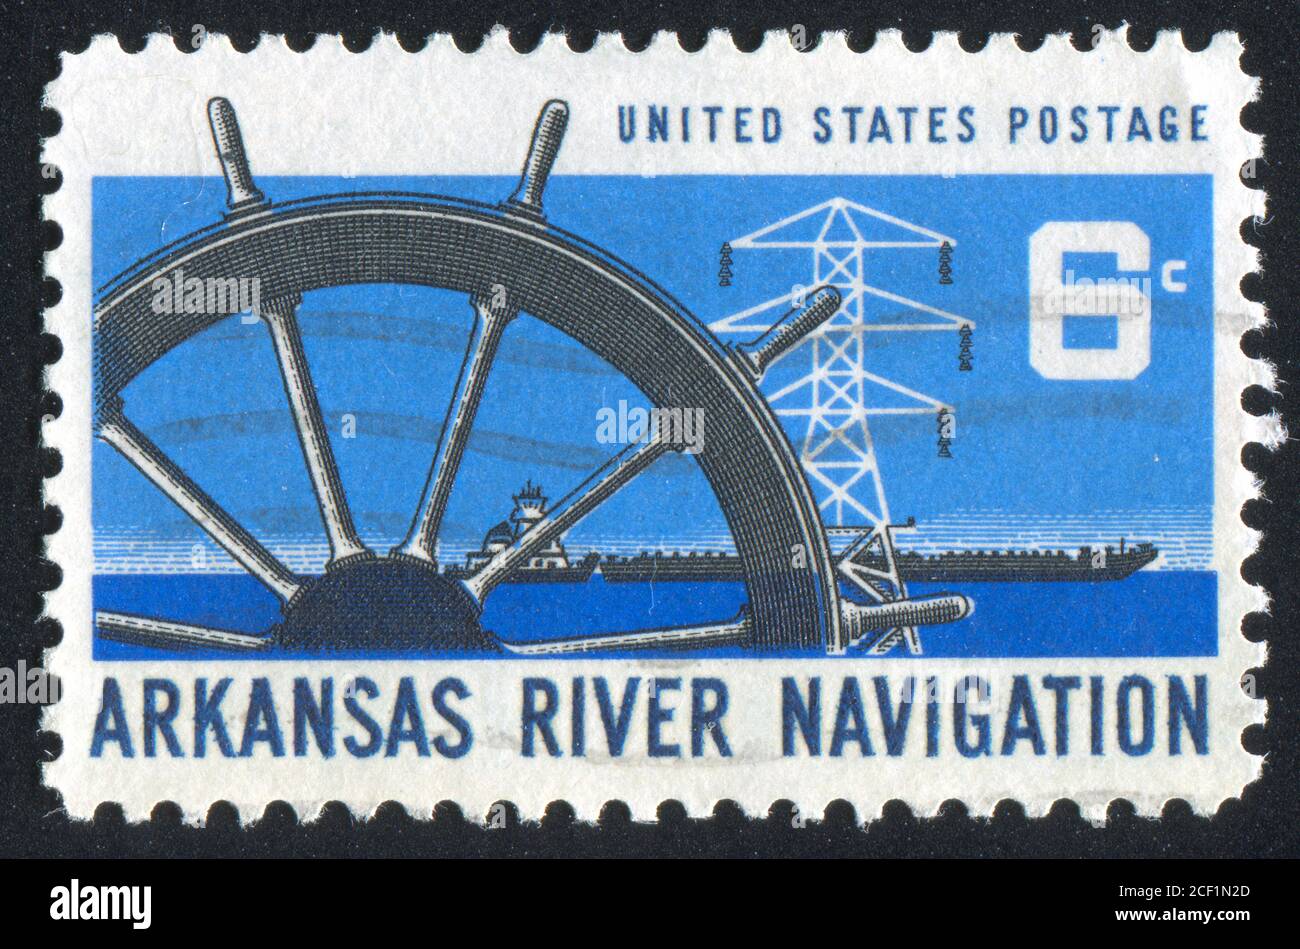 UNITED STATES - CIRCA 1968: stamp printed by United States of America, shows ship wheel, power transmission tower and barge, circa 1968 Stock Photo